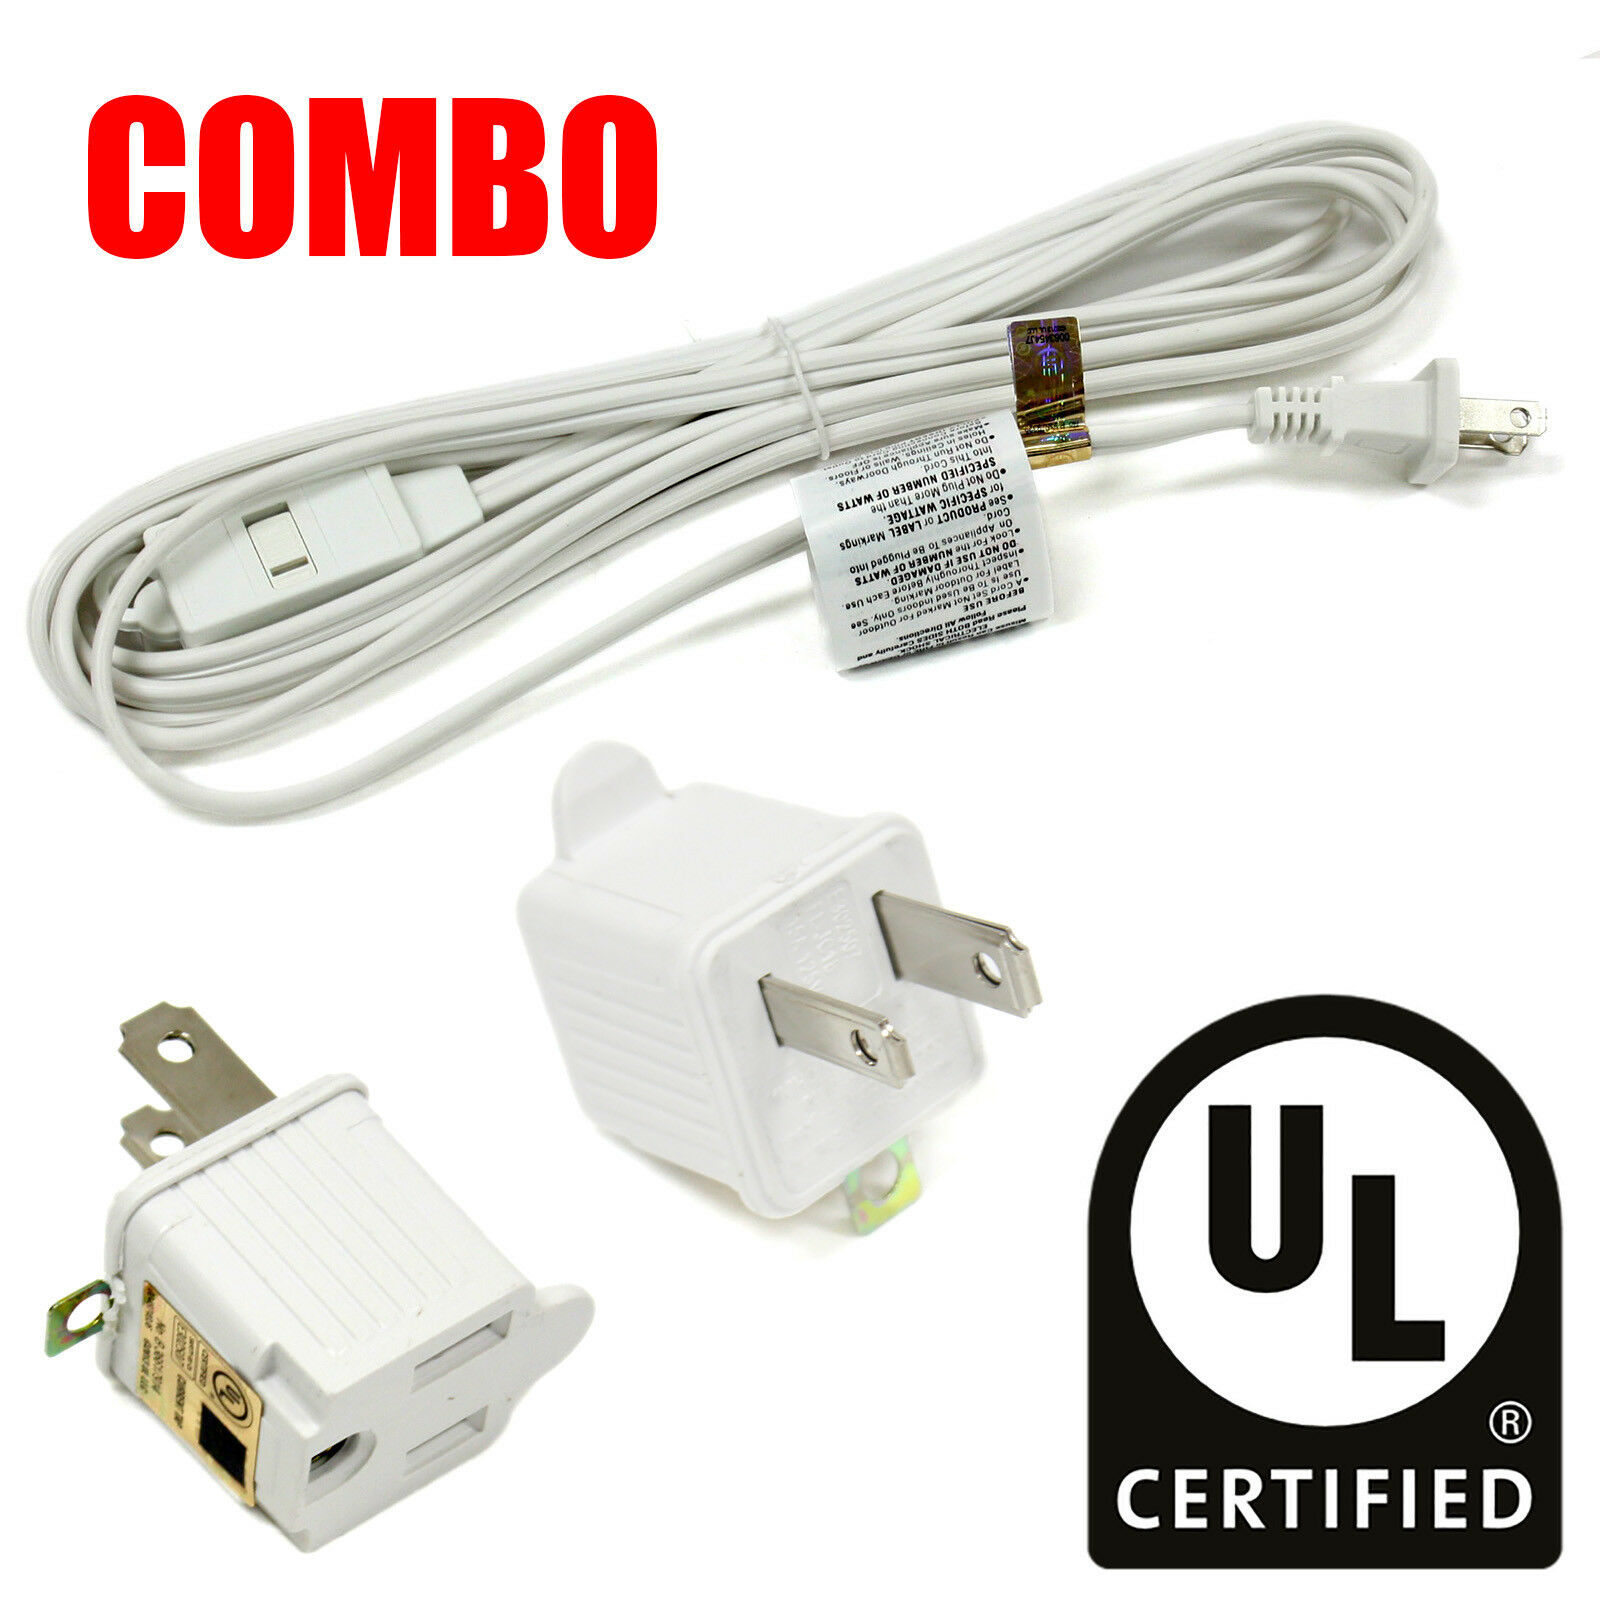 COMBO UL Certified 12ft 3 Outlet Extension Cord Cable & 2pc 2 to 3